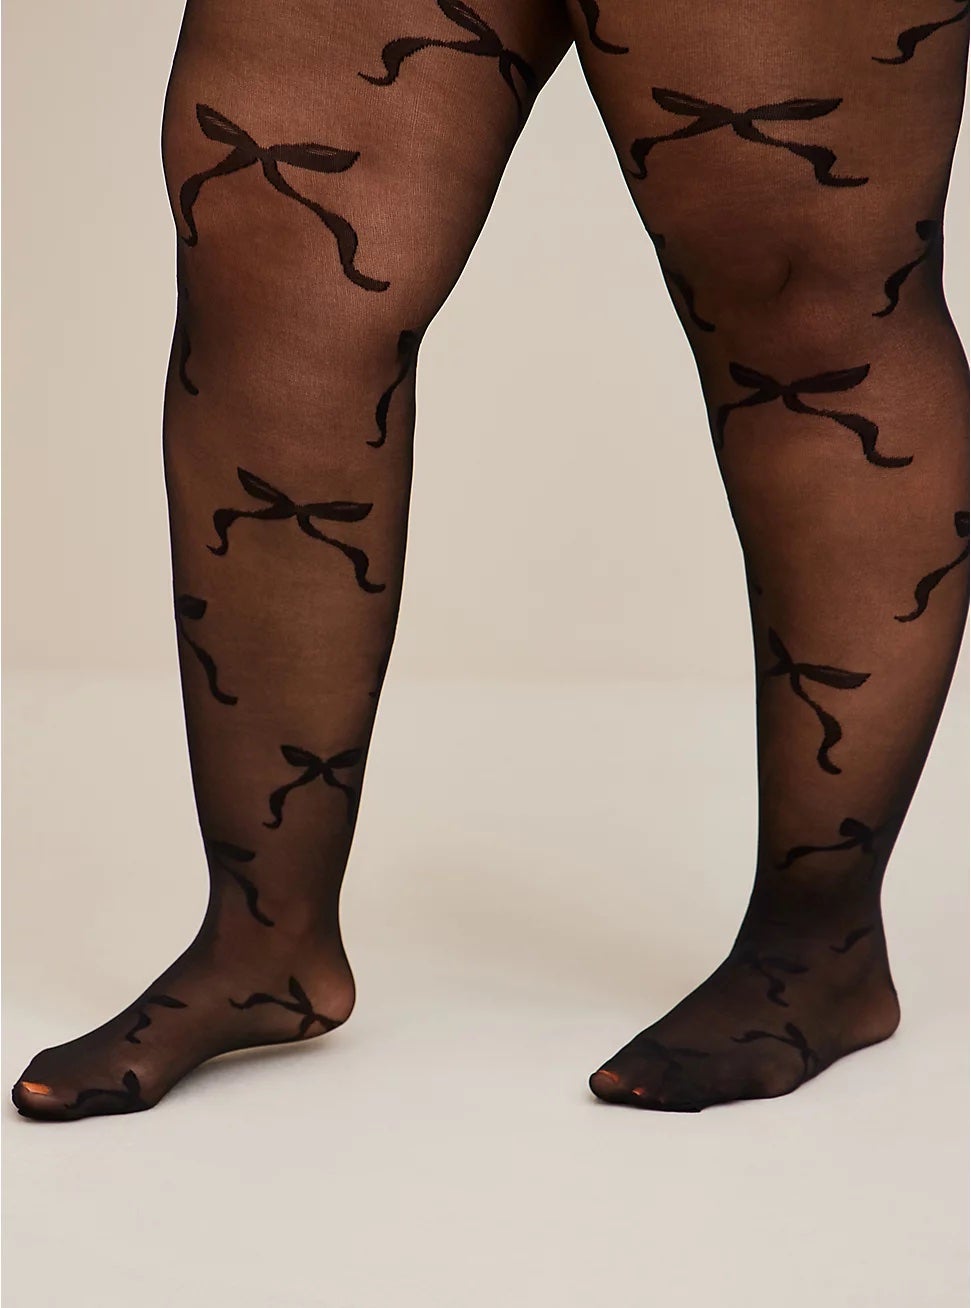 Tights For People Who Hate Wearing Pants